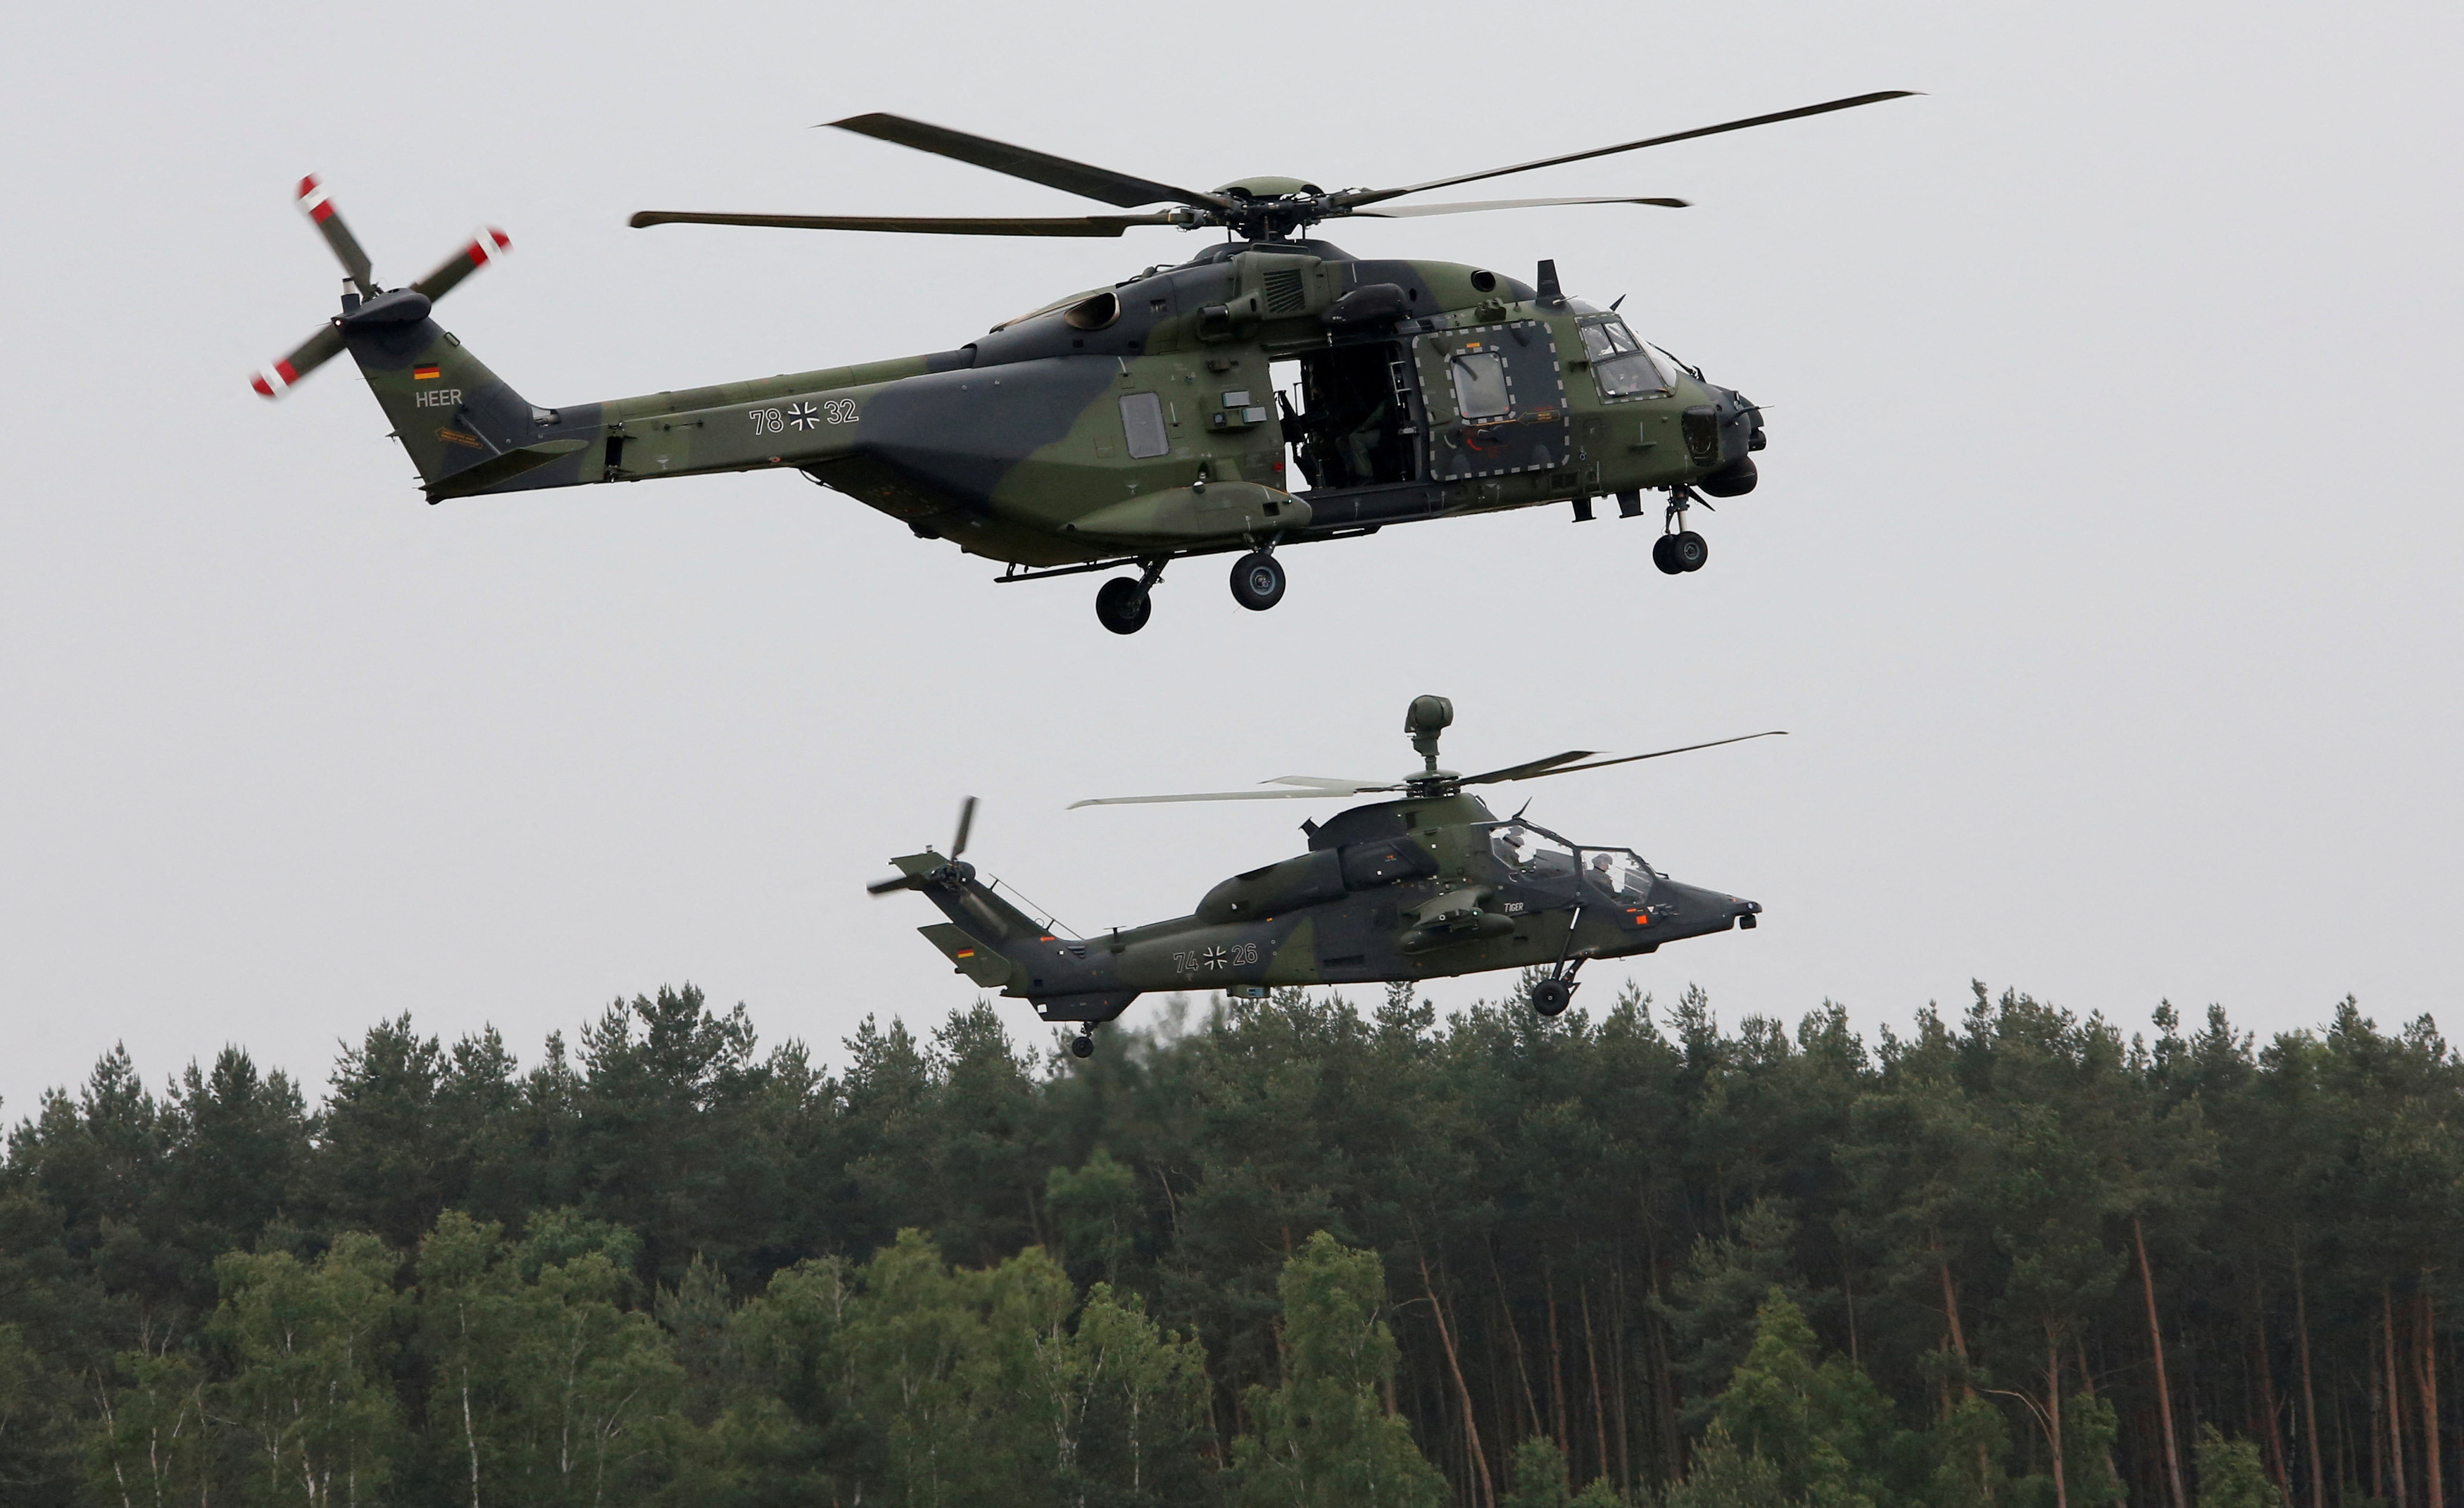 A German Bundeswehr armed forces NH 90 helicopter and a Tiger attack helicopter are seen during a drill at Holzdorf Air Base